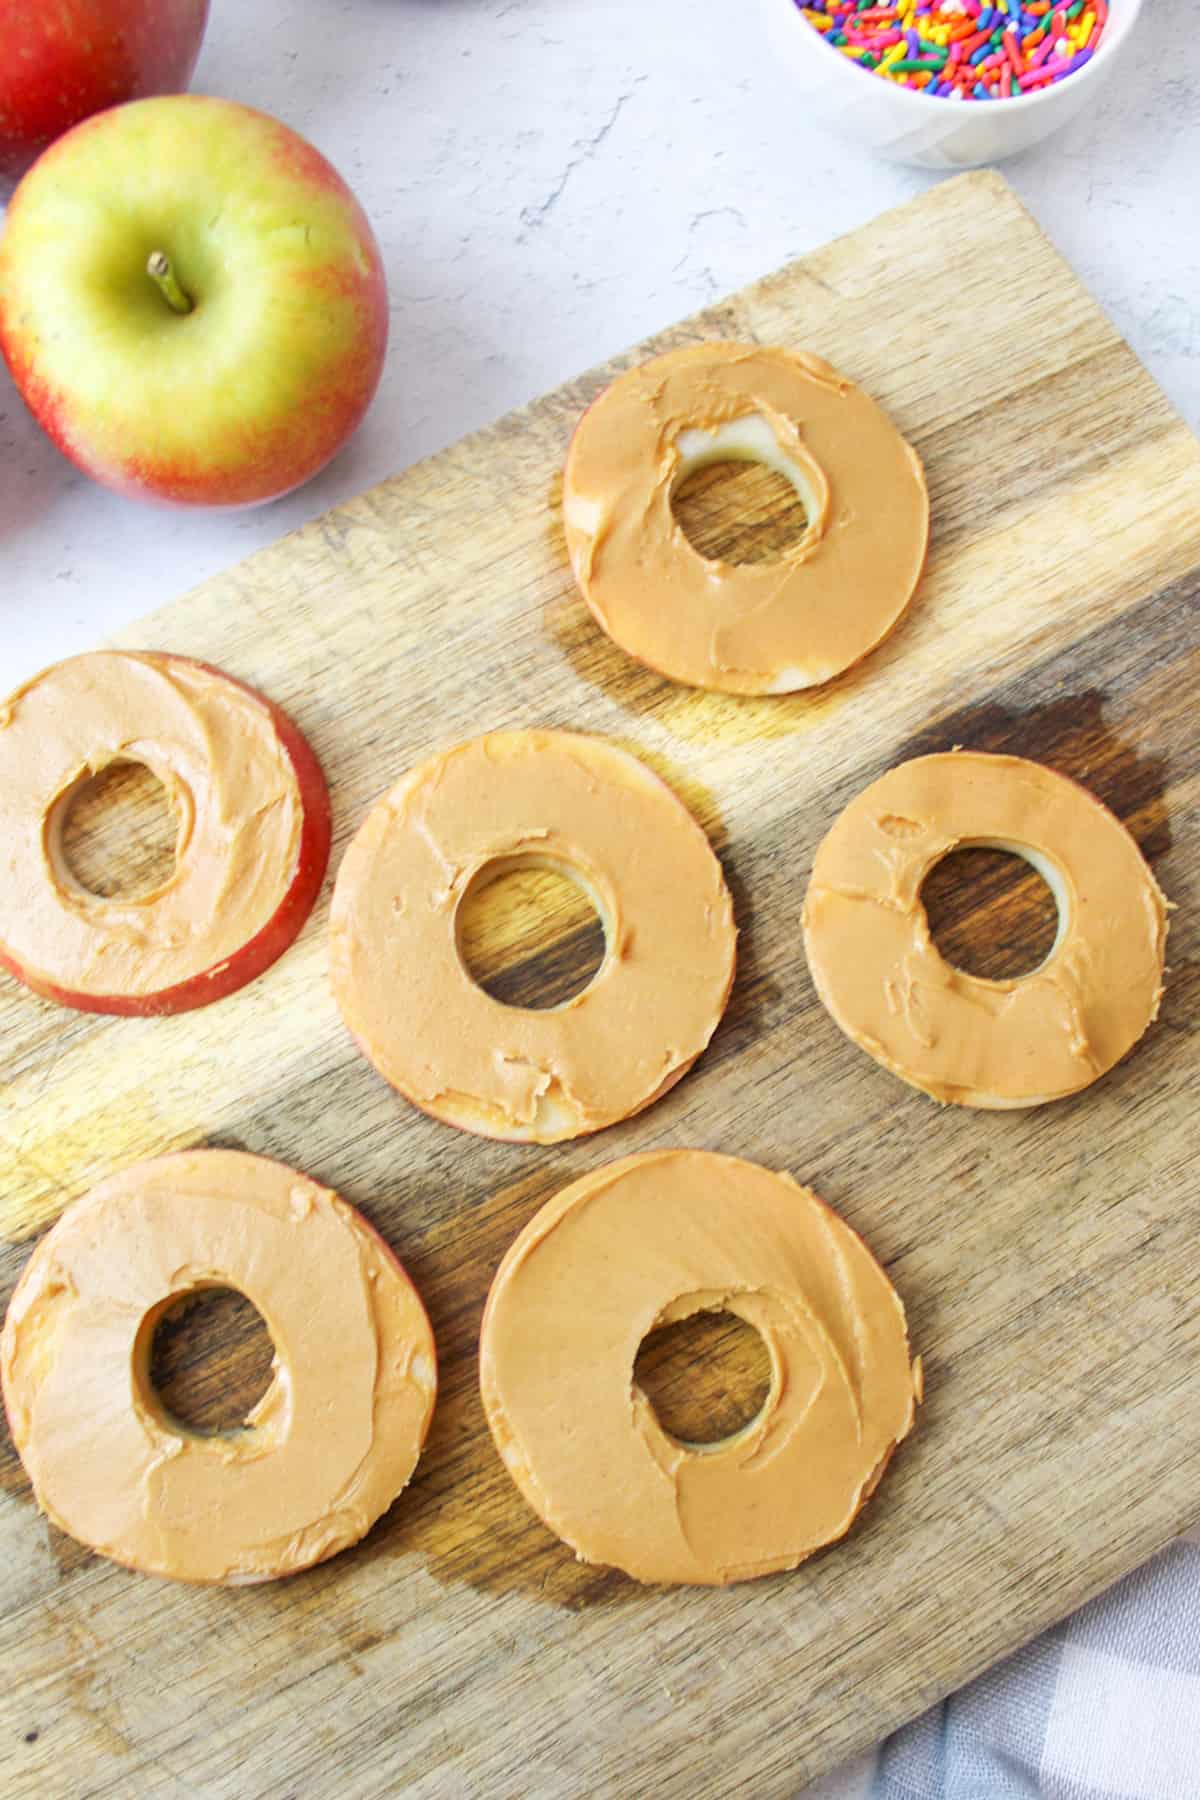 apple rounds smothered in peanut butter on a wooden cutting board